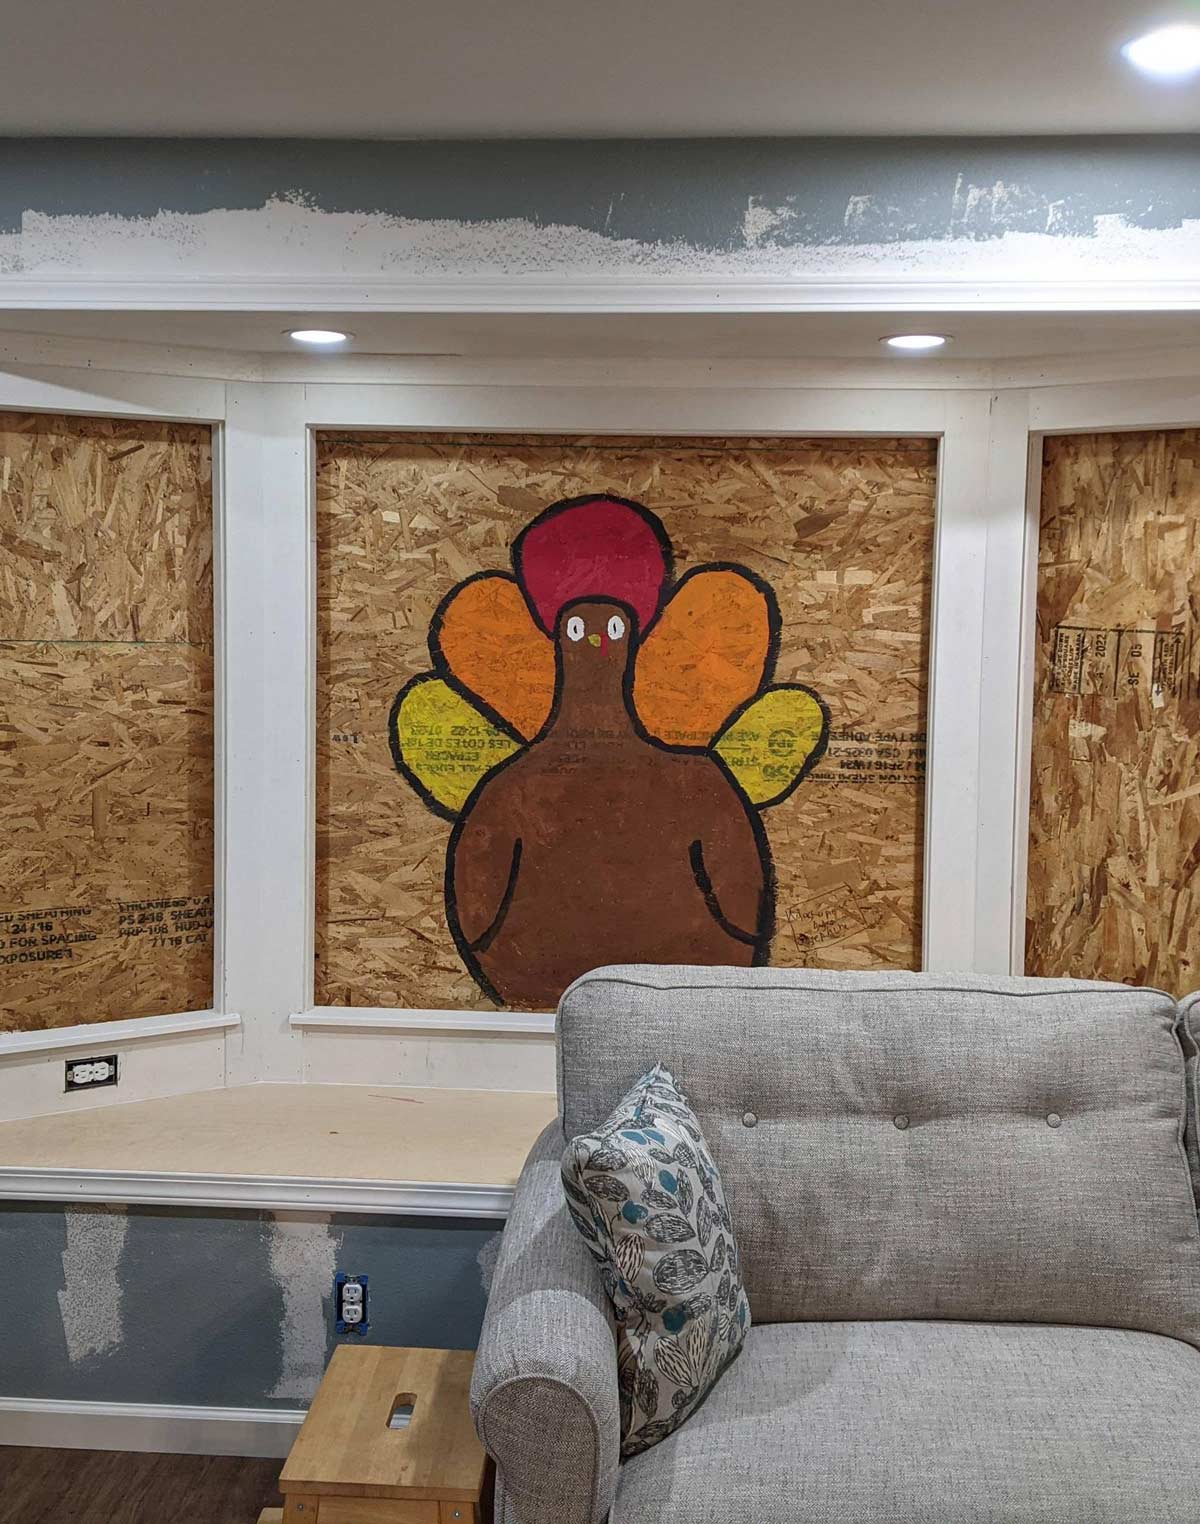 Our remodel project didn't get completed in time for Thanksgiving, so my daughter painted a turkey on the plywood